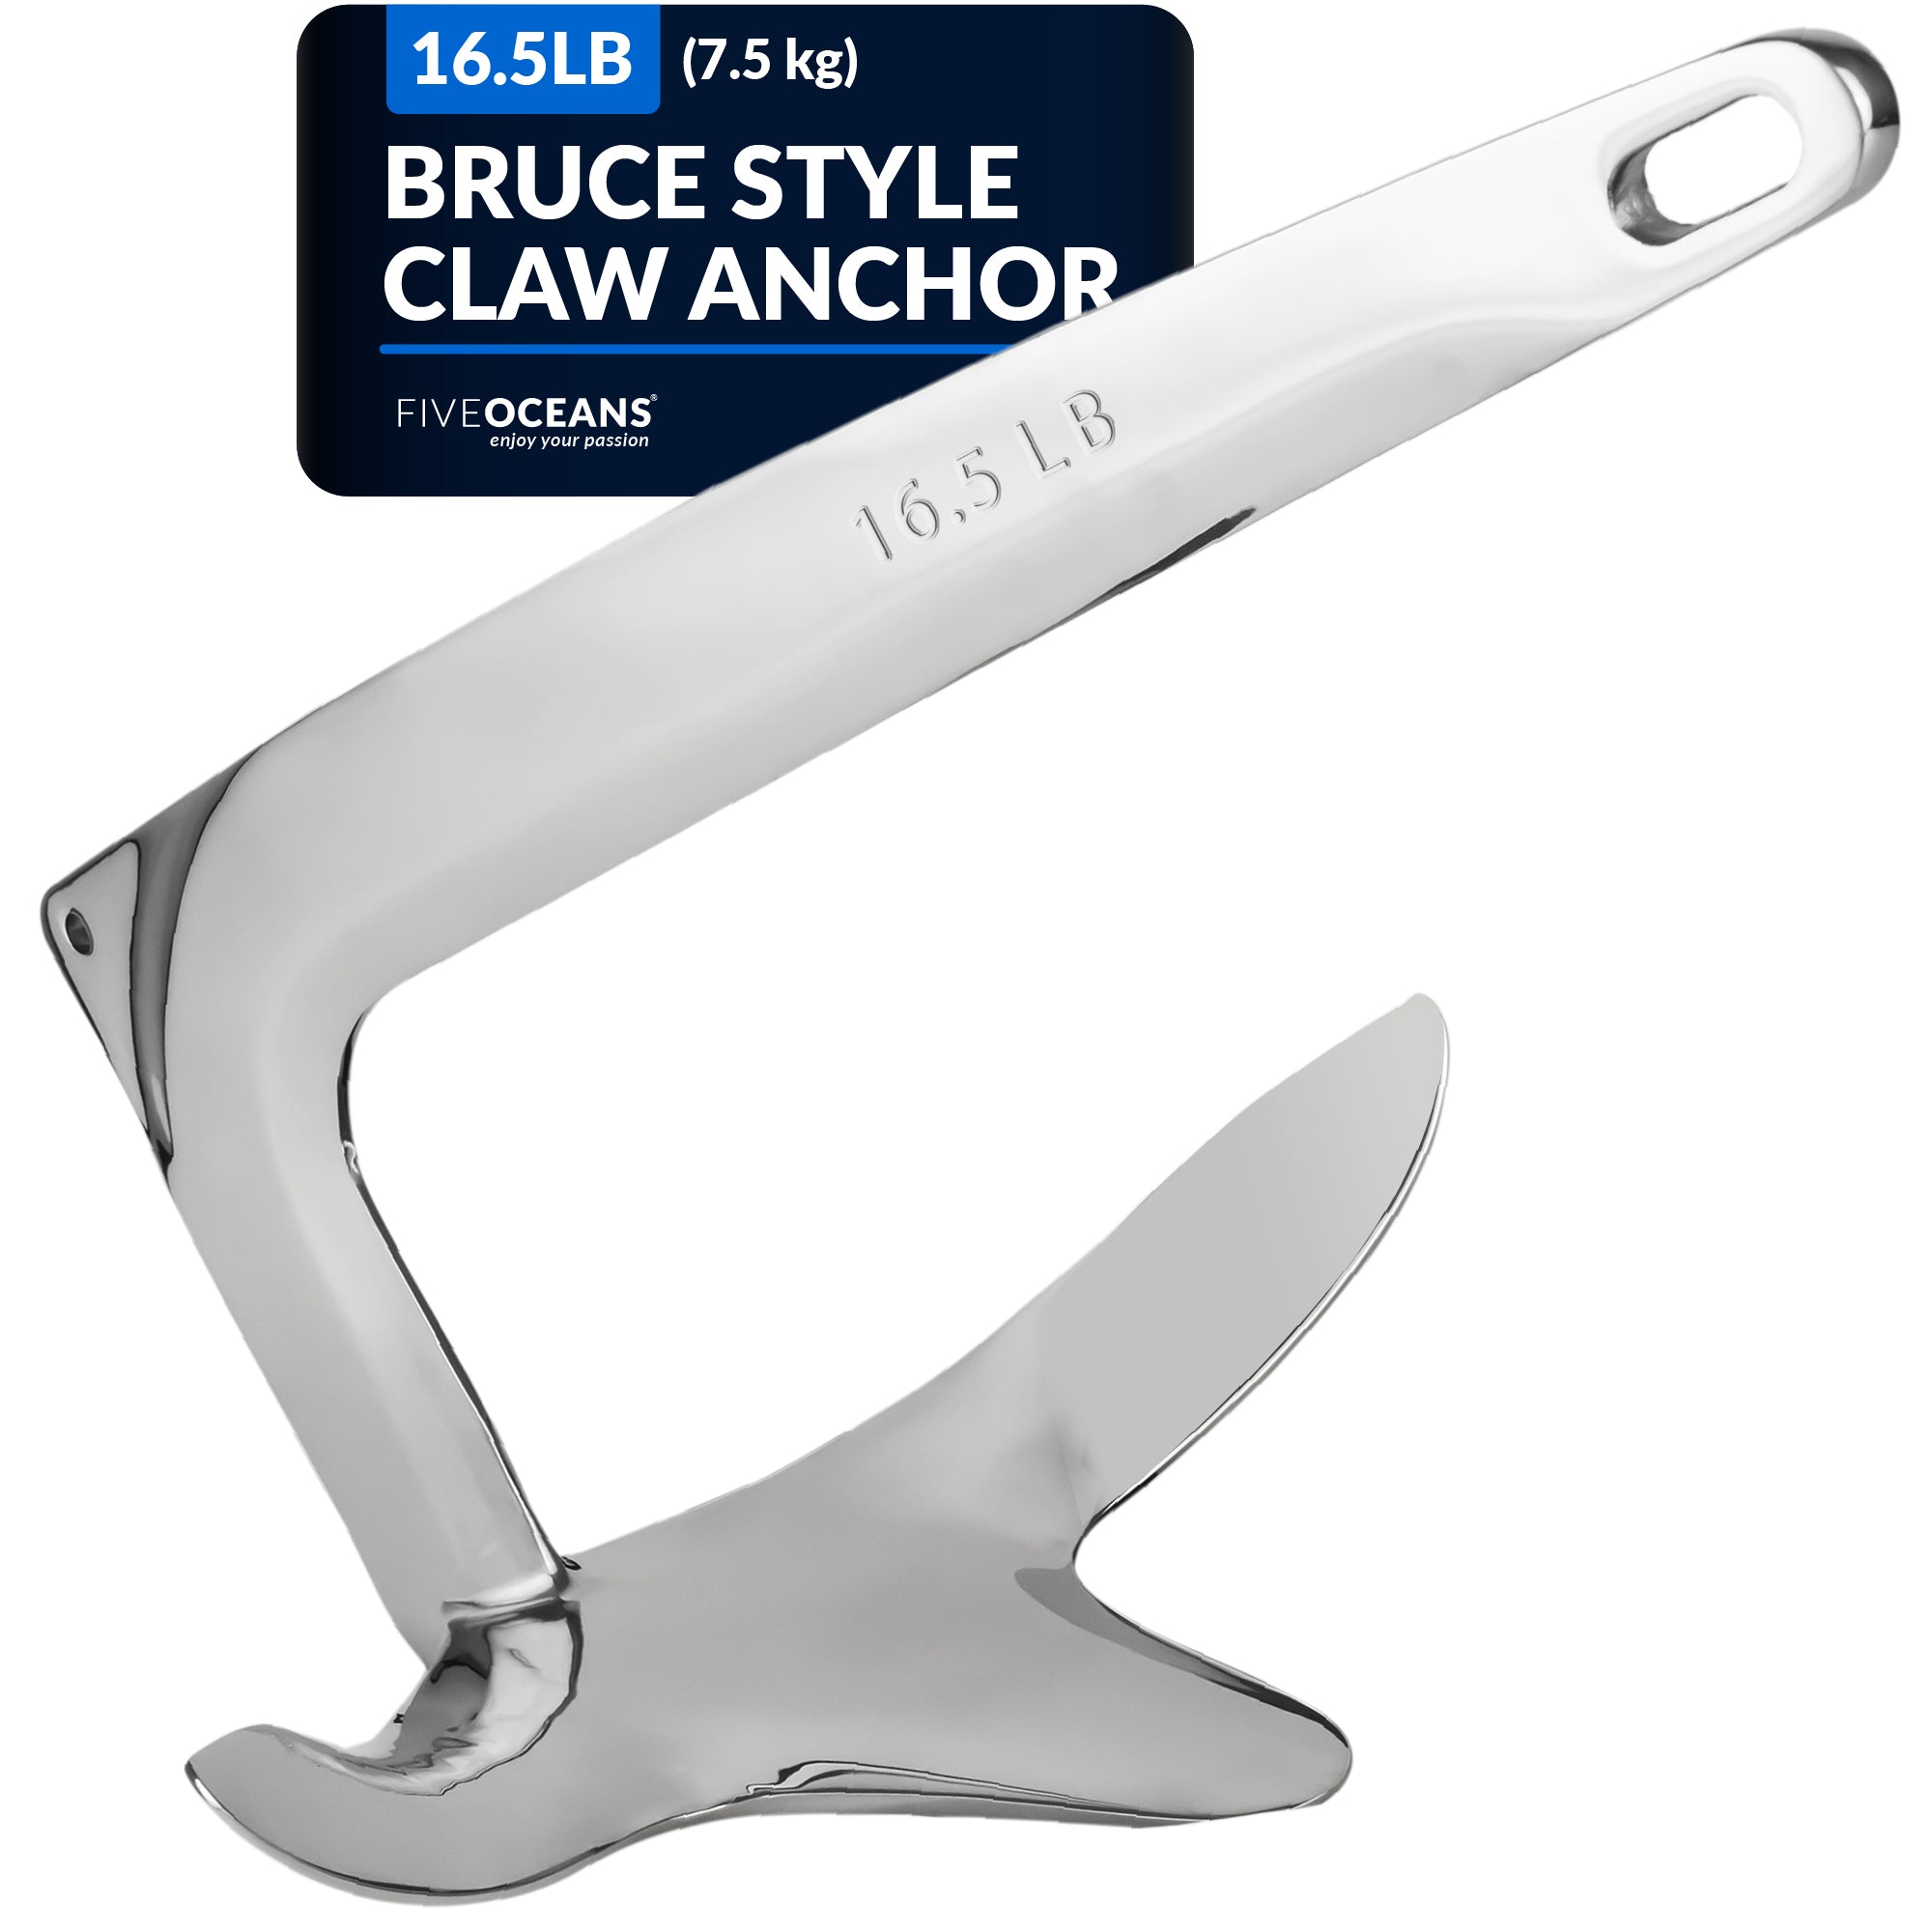 Bruce Style Claw Anchor, 16.5 Lb / 7.5 Kg, Stainless Steel - FO336